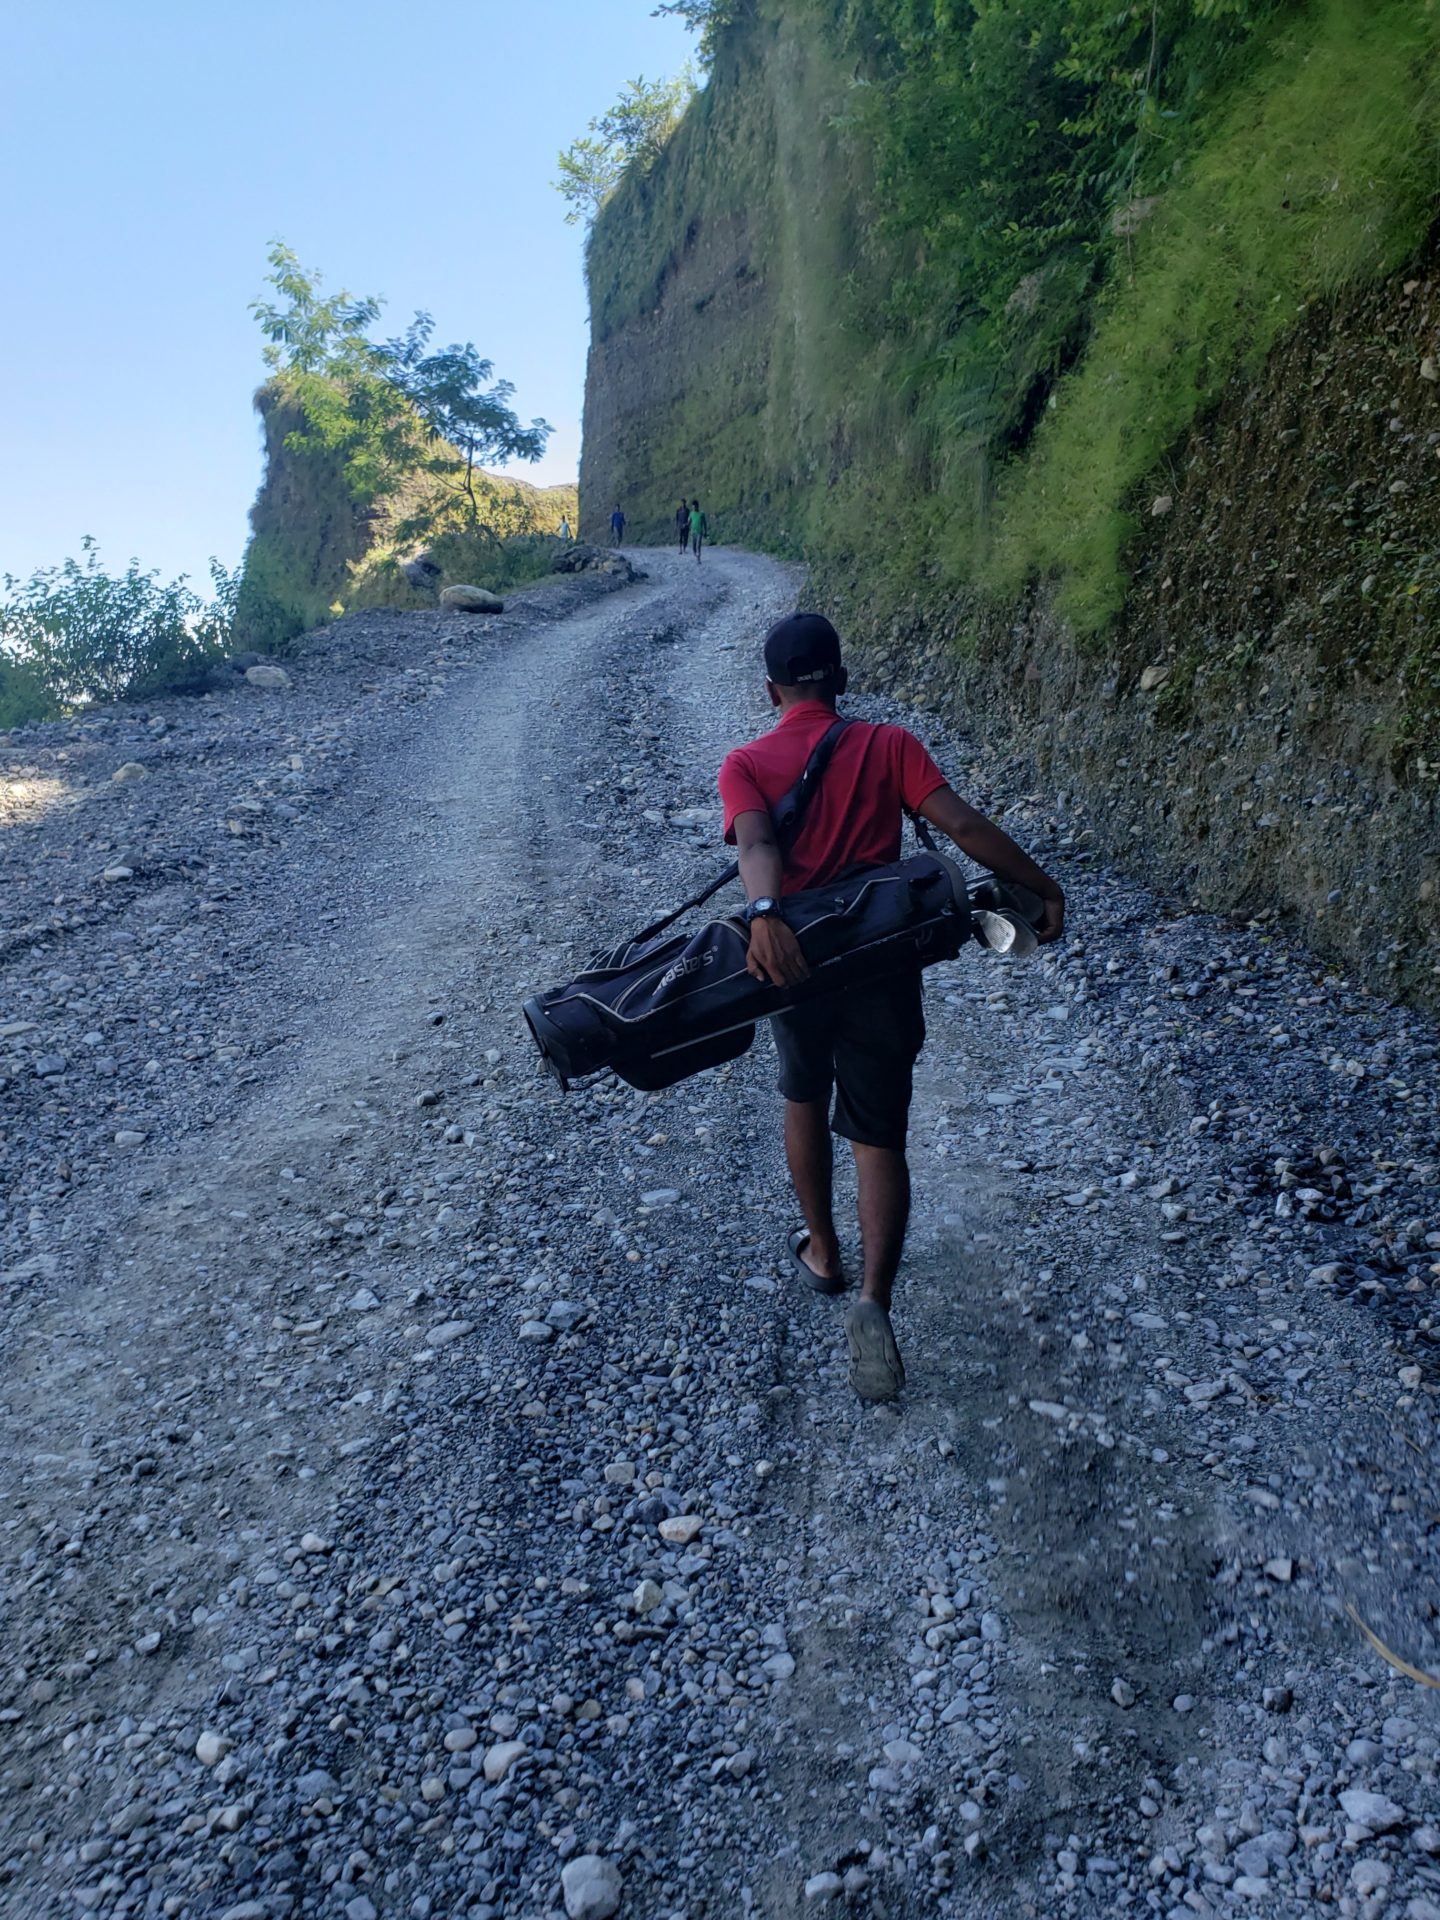 a man carrying golf bags on a rocky road